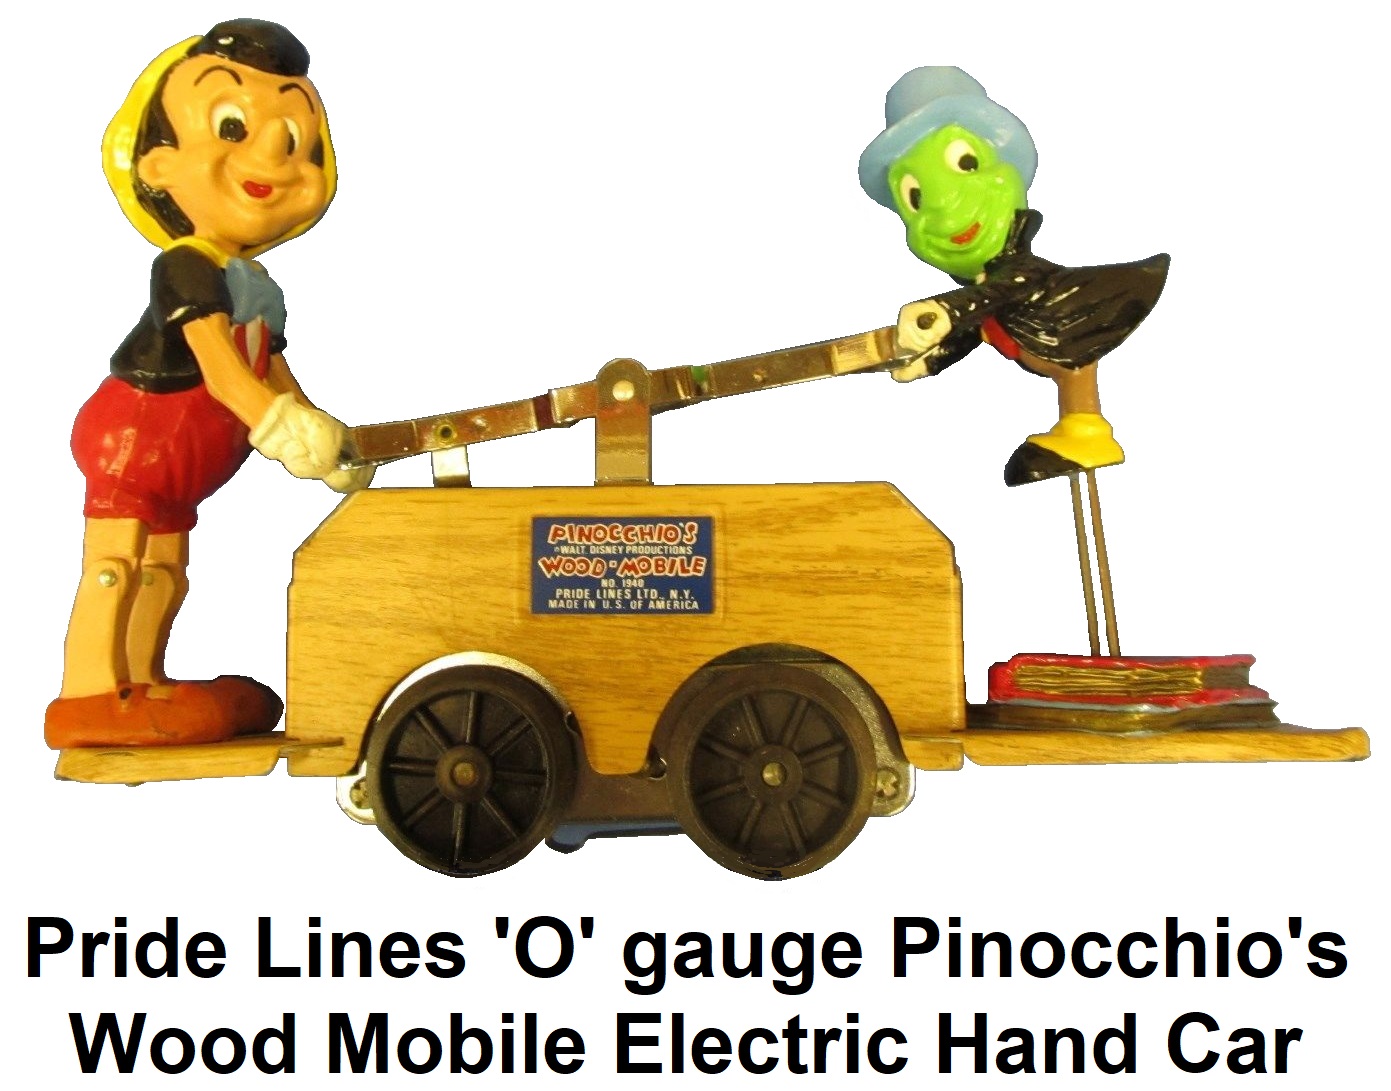 Pride Lines 'O' gauge Pinocchio's Wood Mobile Electric powered hand car